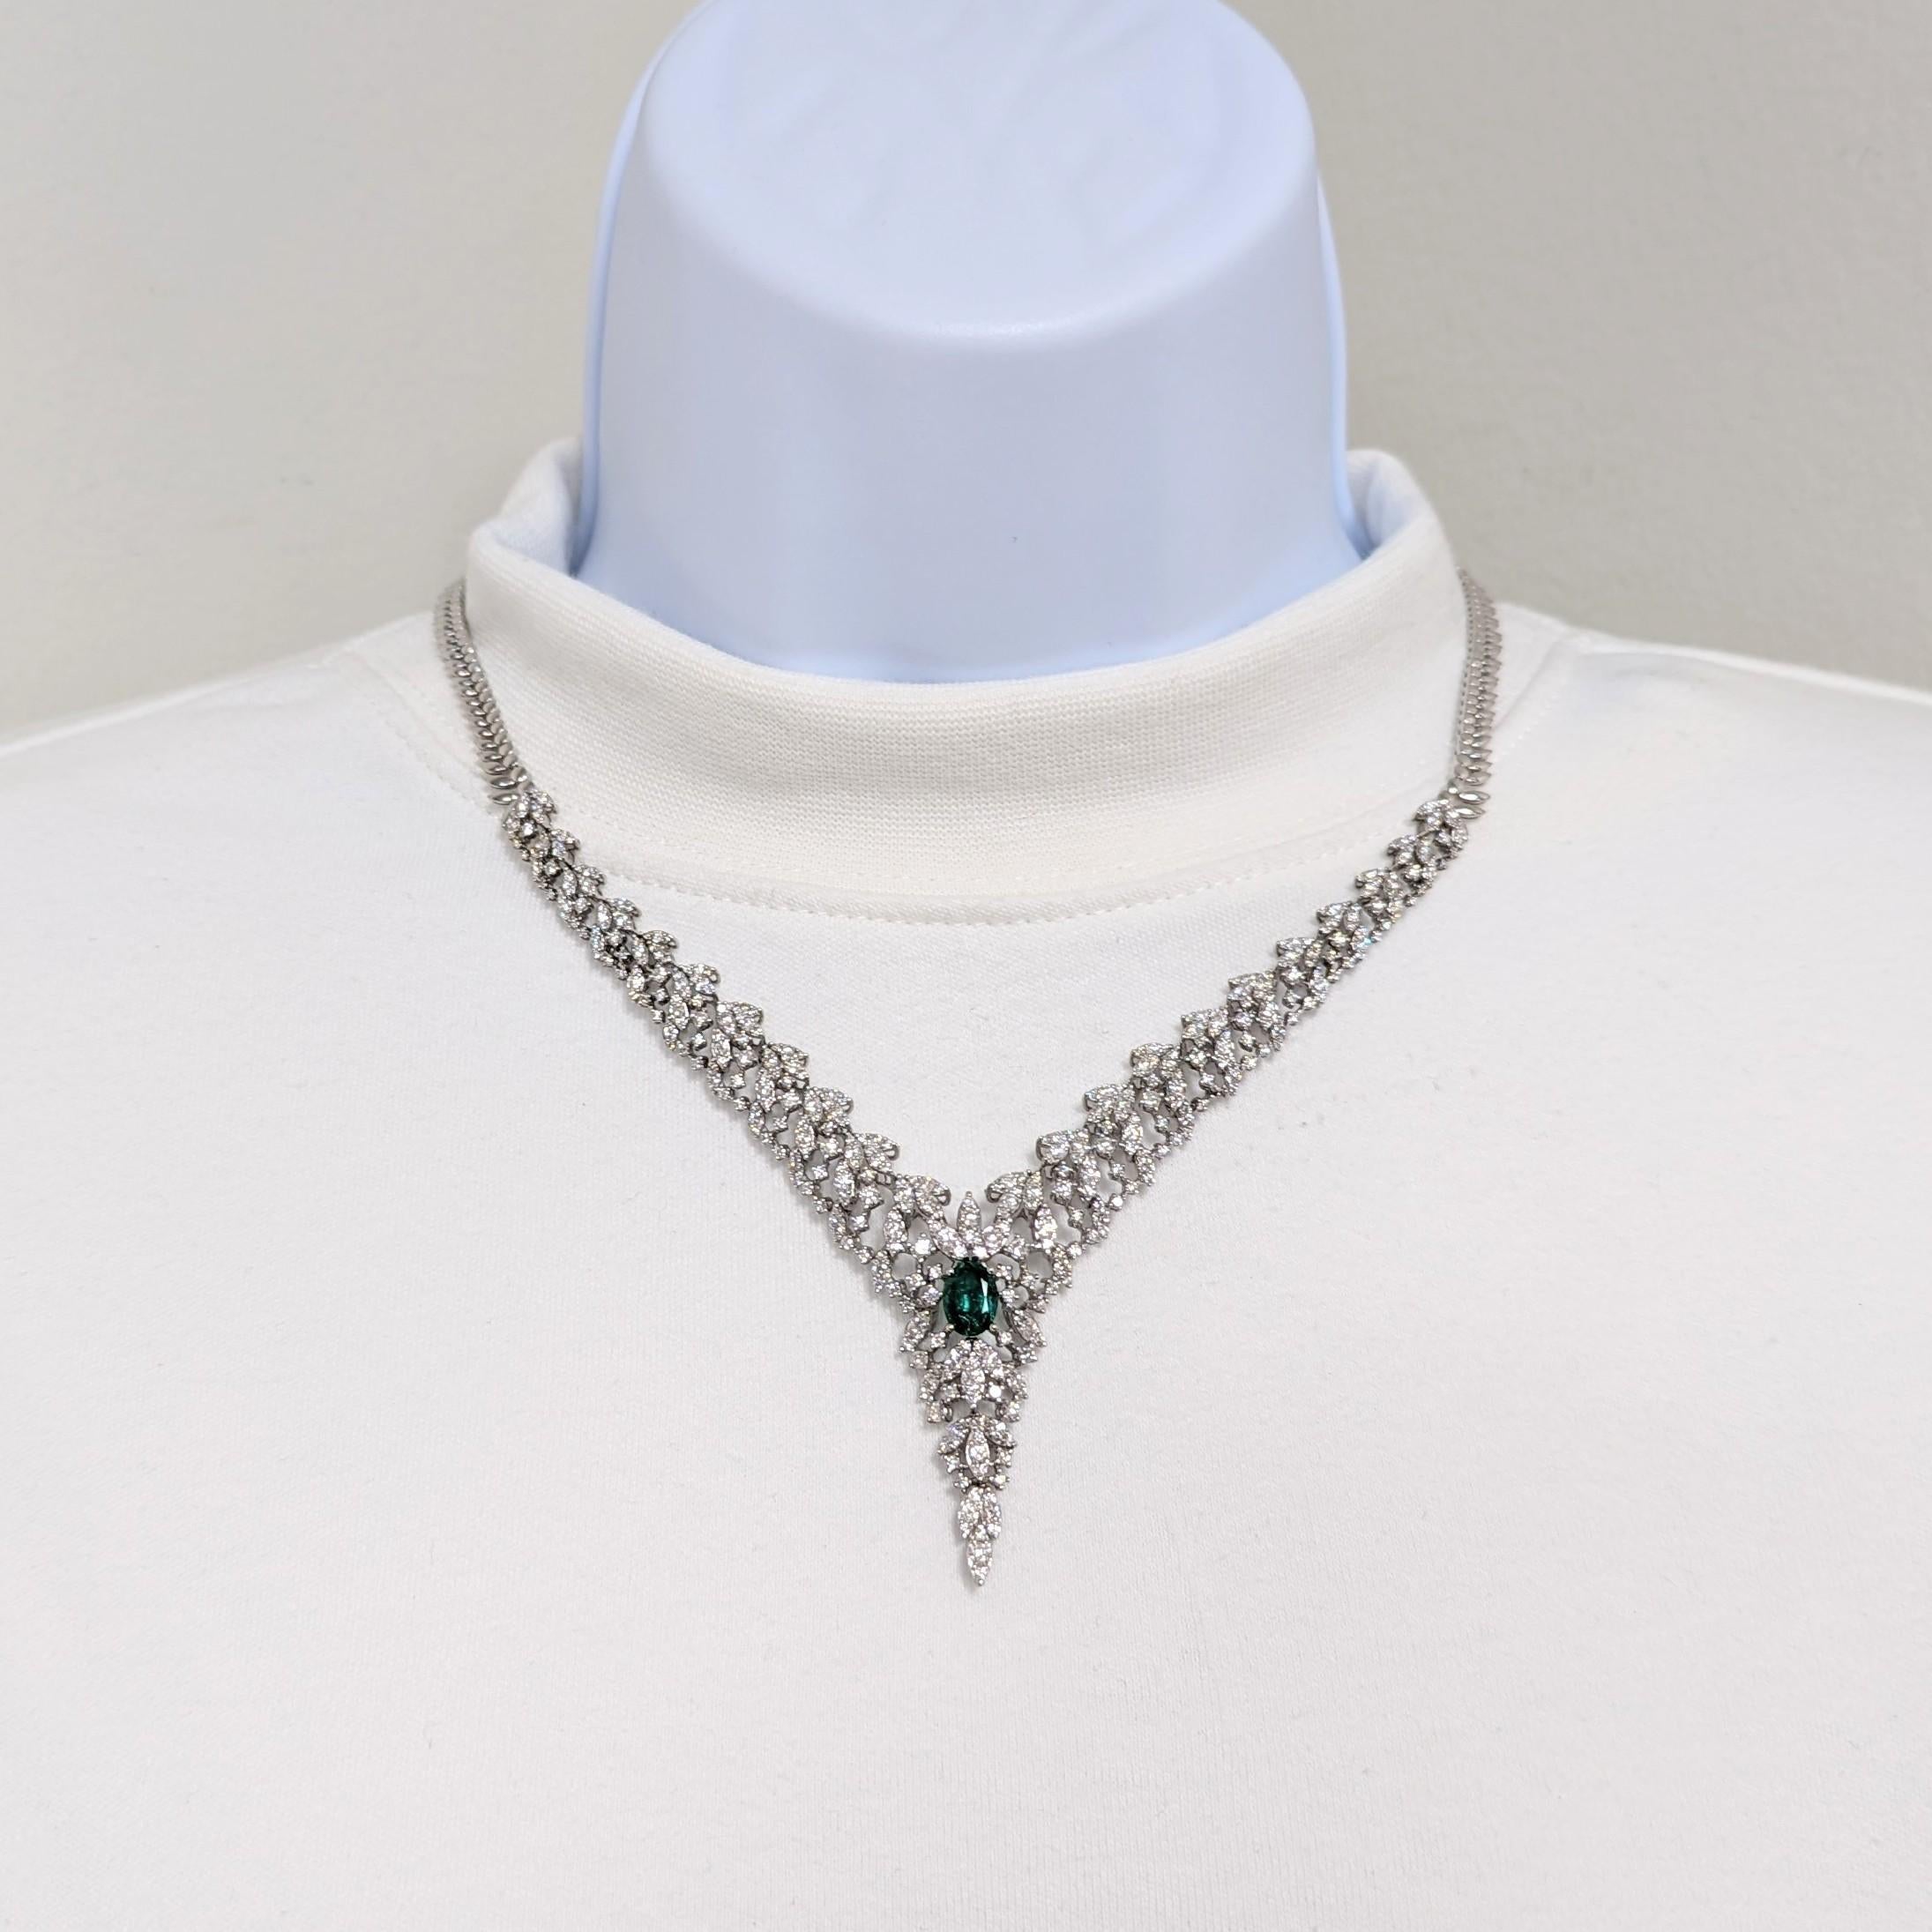 Beautiful cluster style necklace a with 1.86 ct. emerald oval and 7.50 ct. of good quality, white, and bright diamond rounds and marquise shapes.  Handmade in 14k white gold.  Length is 16